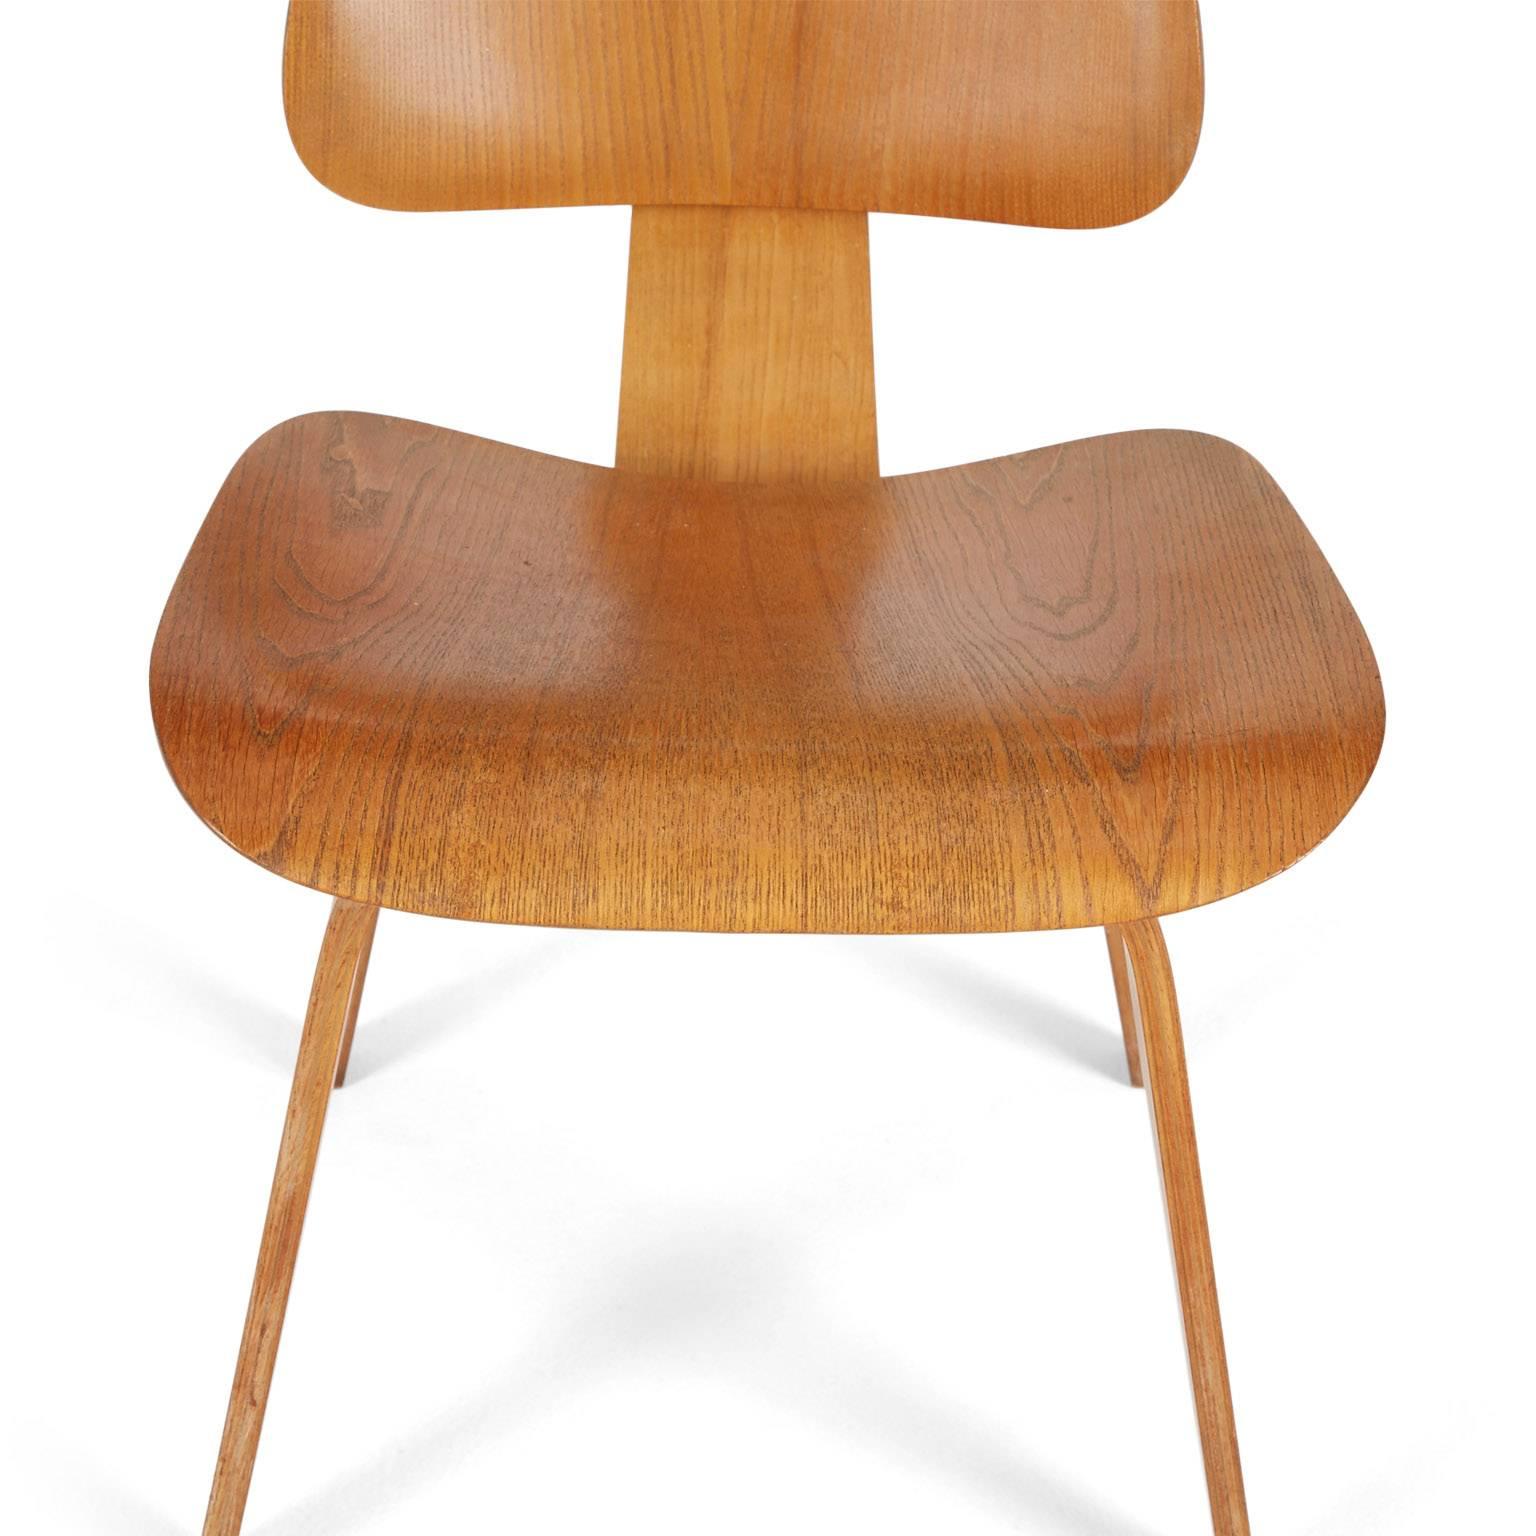 Mid-Century Modern Evans Rare 1940s DCW Molded Plywood Chairs by Charles and Ray Eames